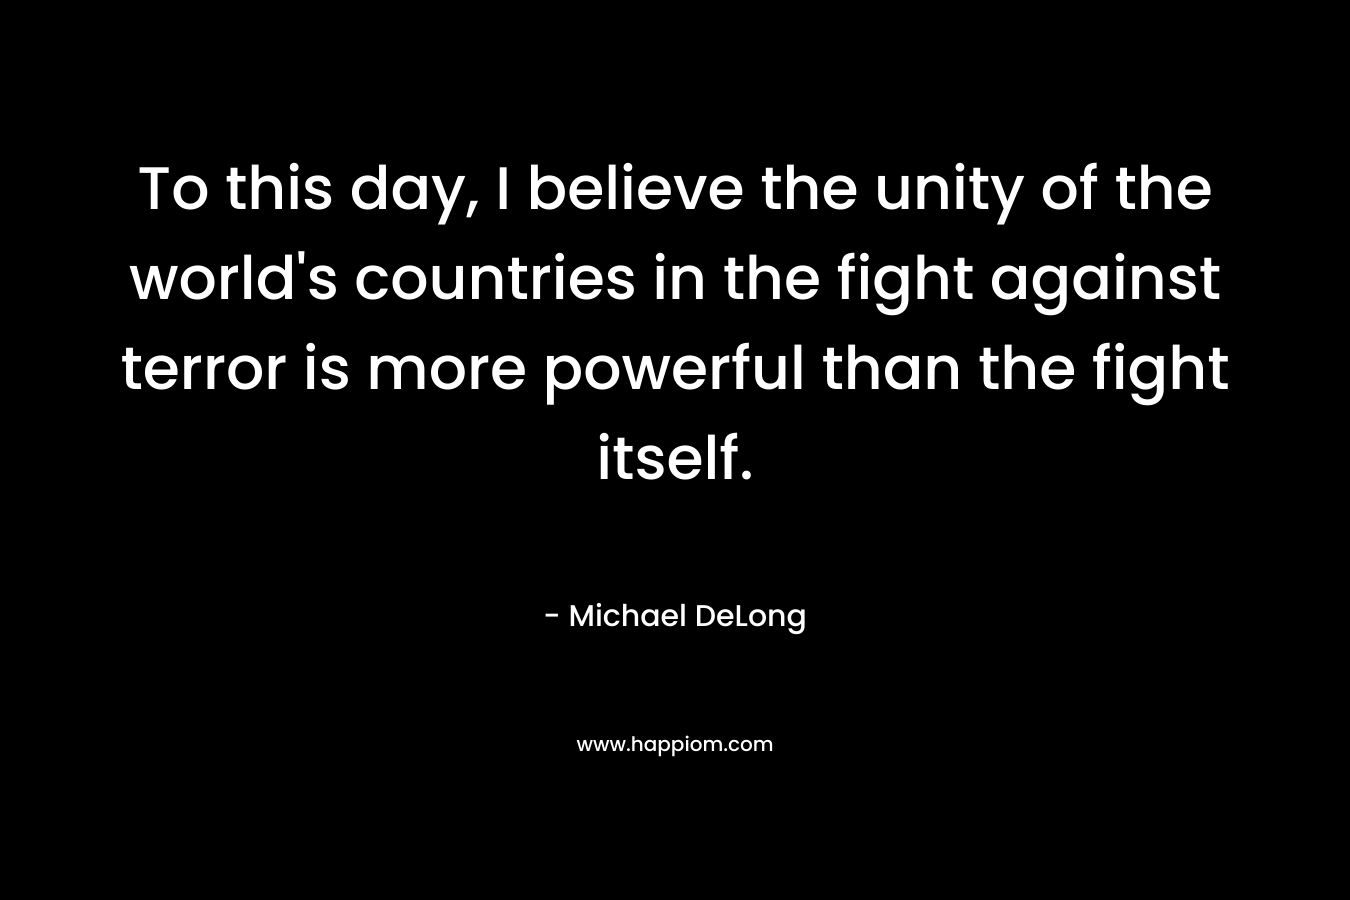 To this day, I believe the unity of the world’s countries in the fight against terror is more powerful than the fight itself. – Michael DeLong